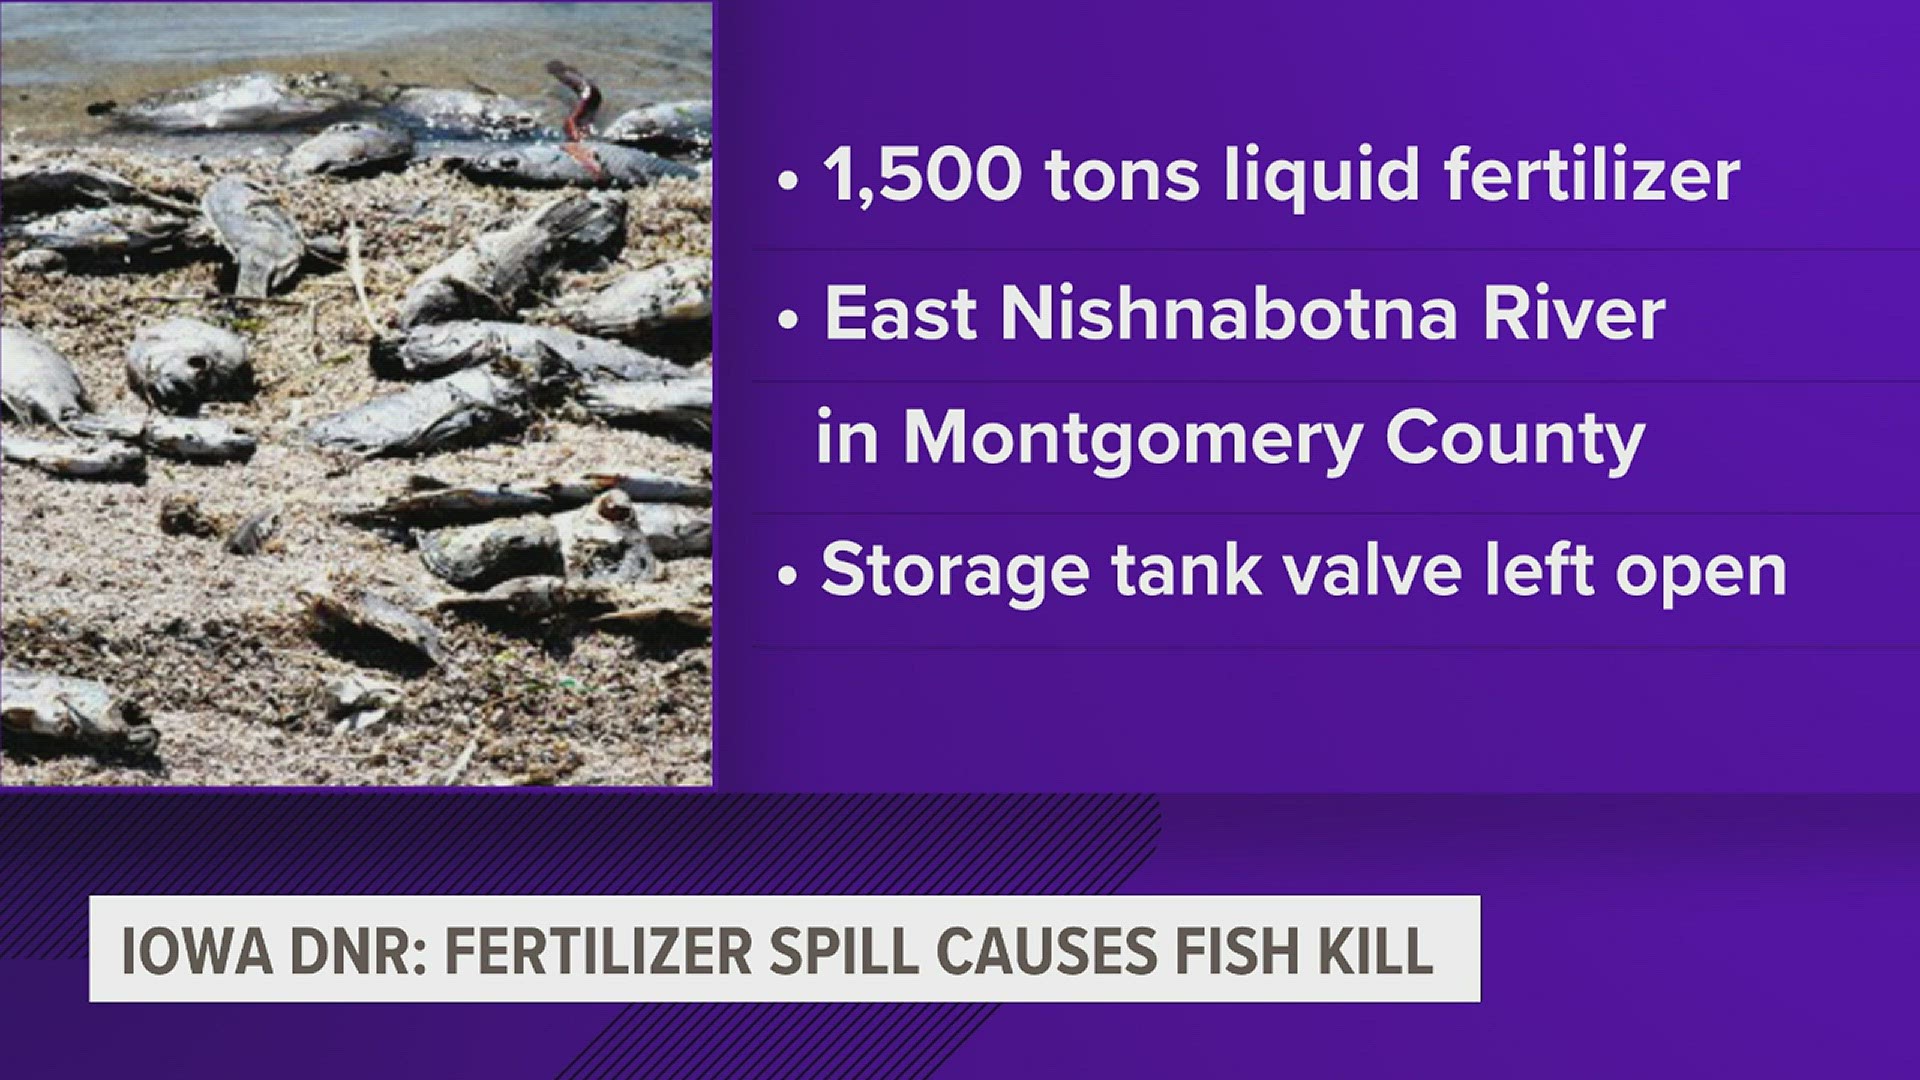 The spill has caused a fish kill, with officials still working to determine how widespread the issue is.